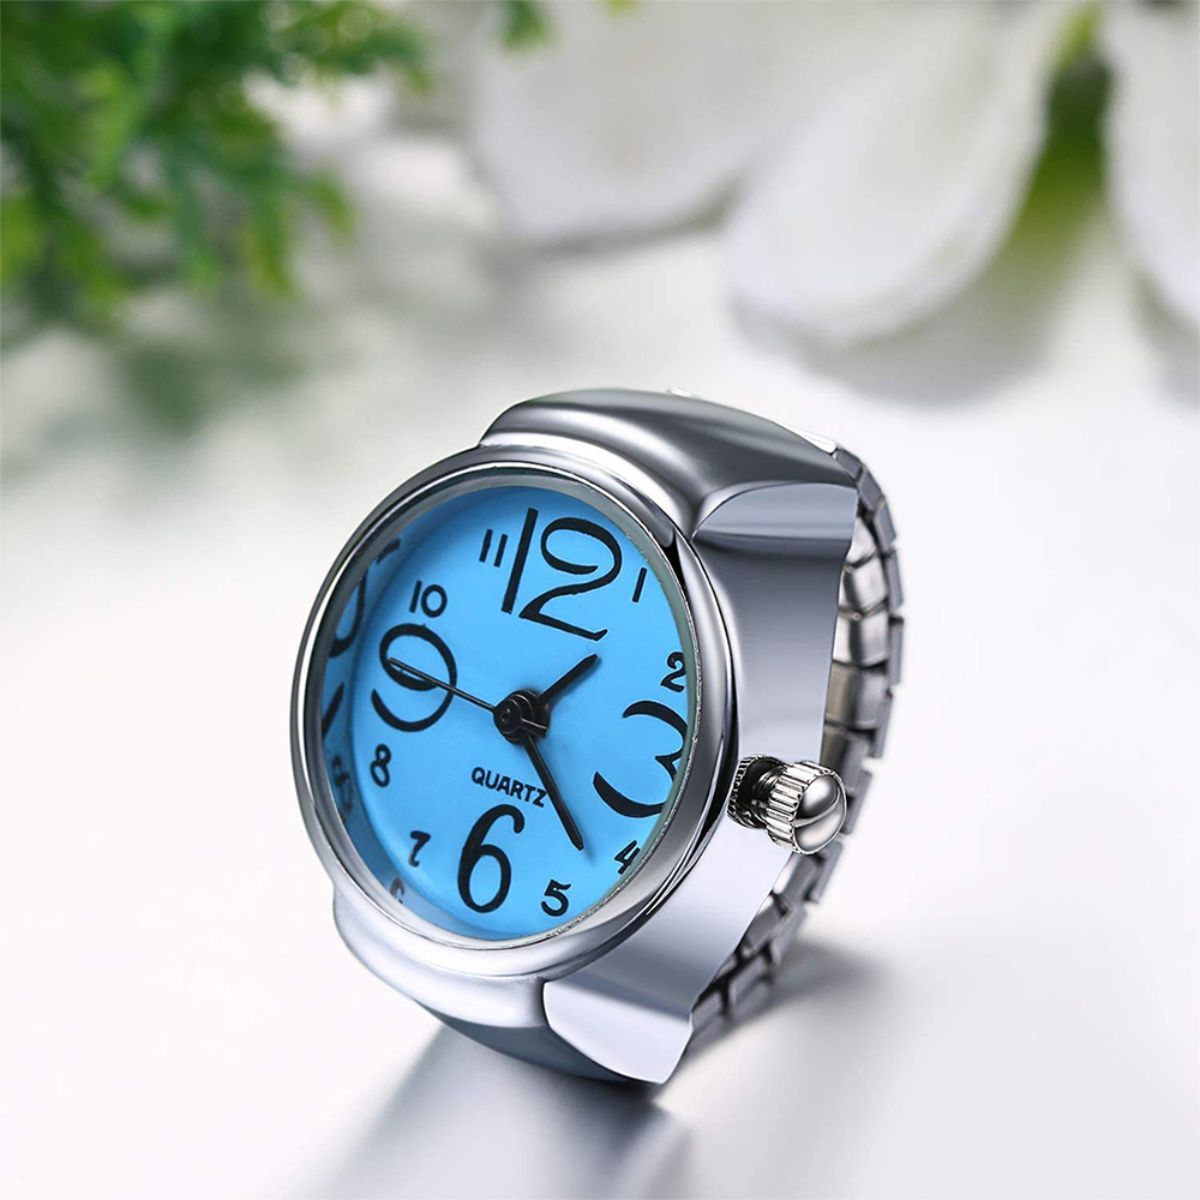 Own a Pikoo Finger Watch; the ultimate ring watch!